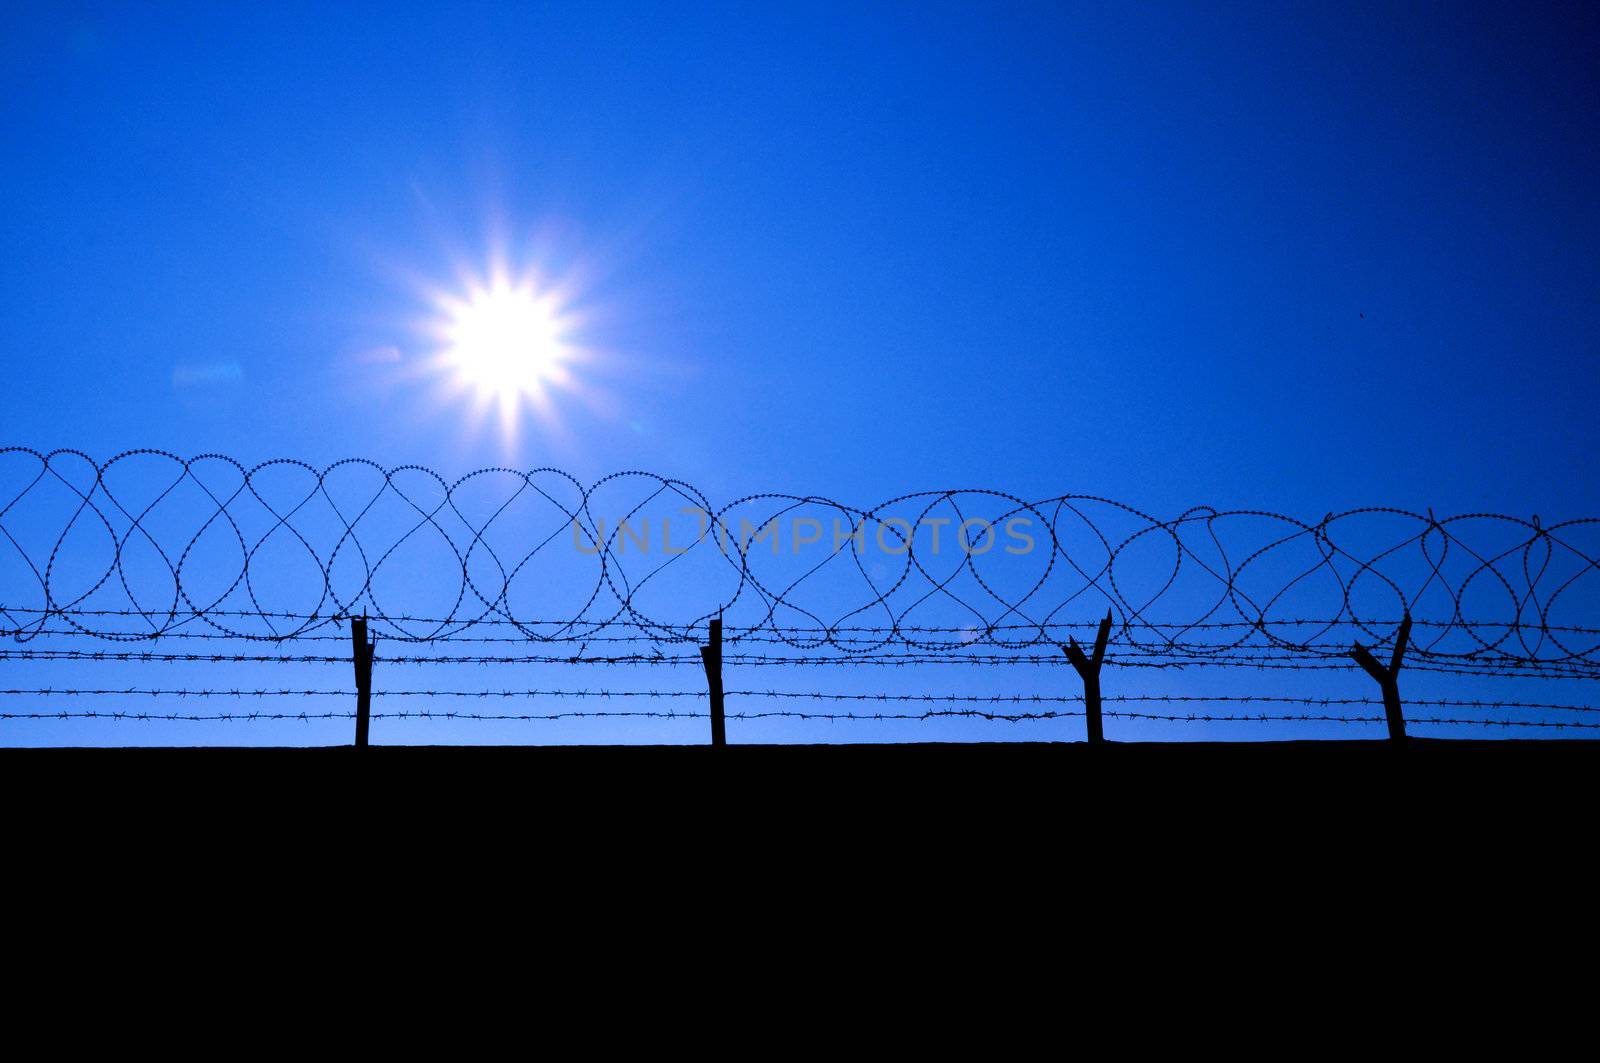 Fence with a barbed wire and blue sky